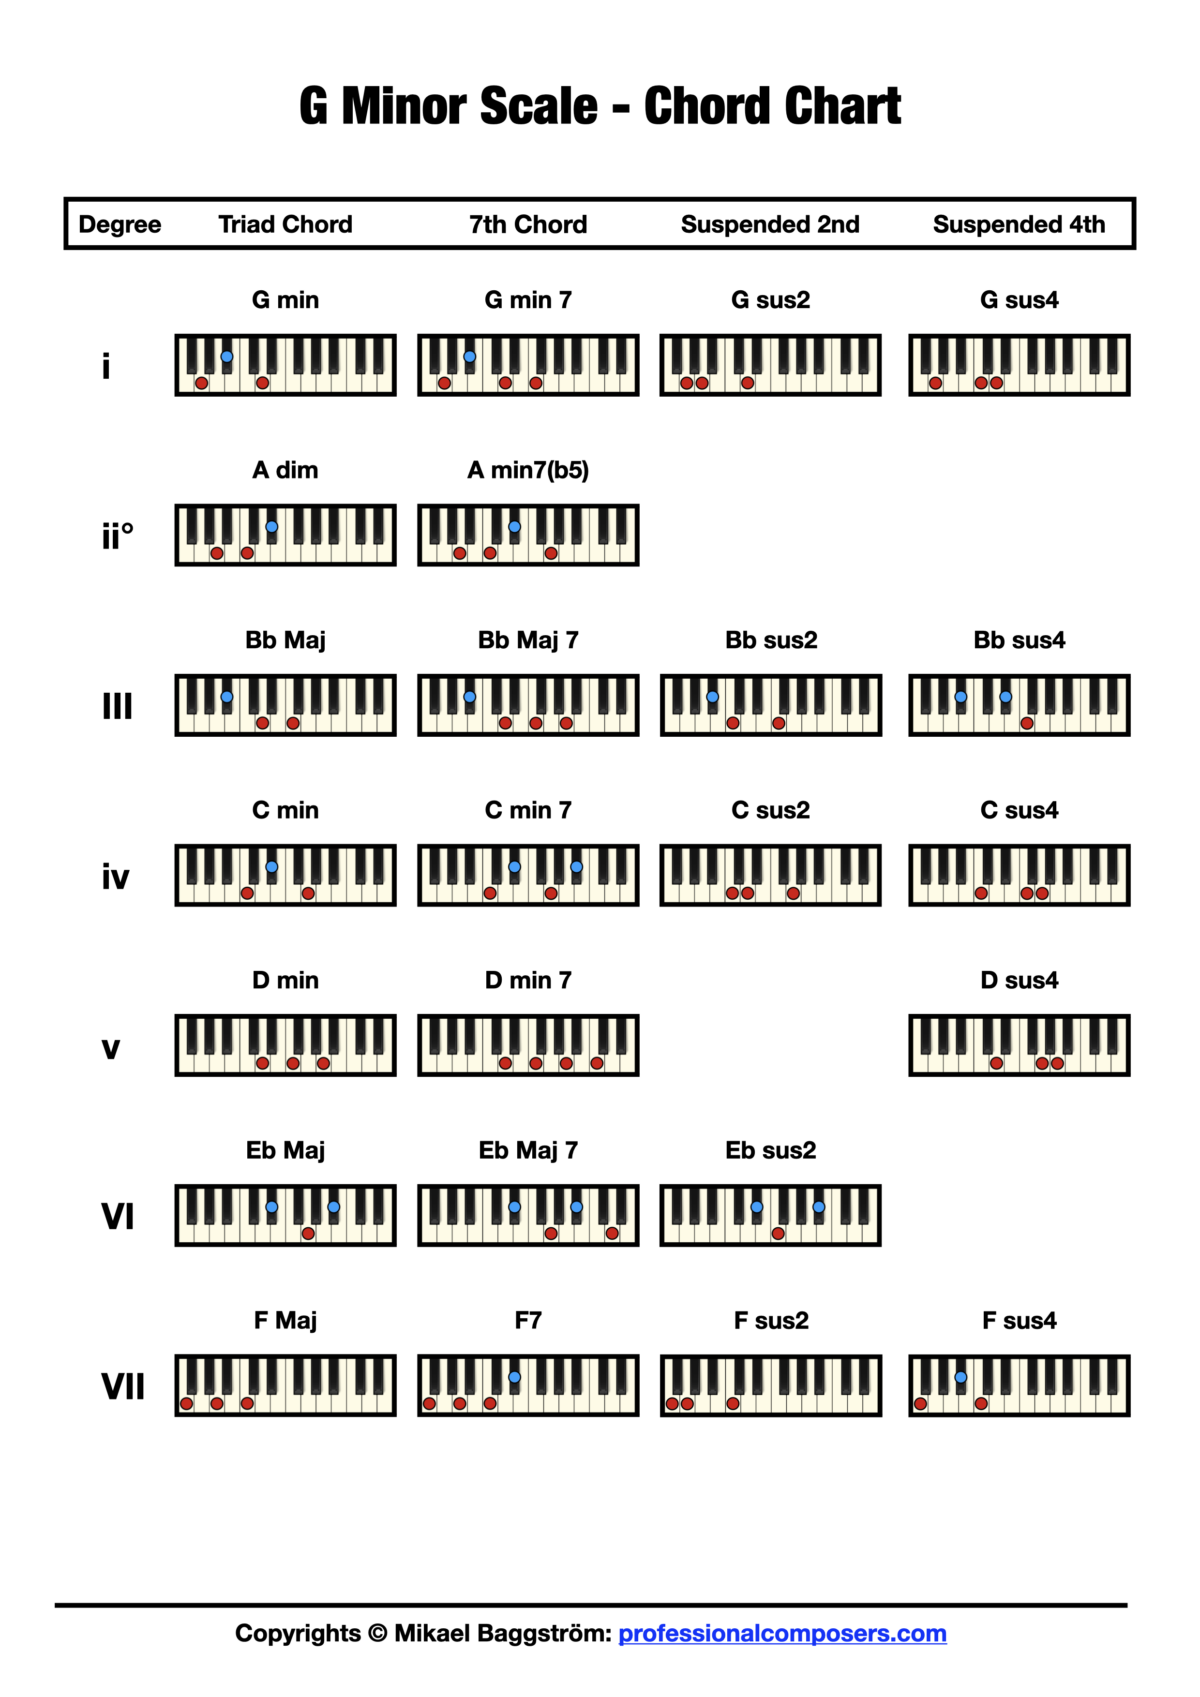 Chord Chart - G Minor Scale